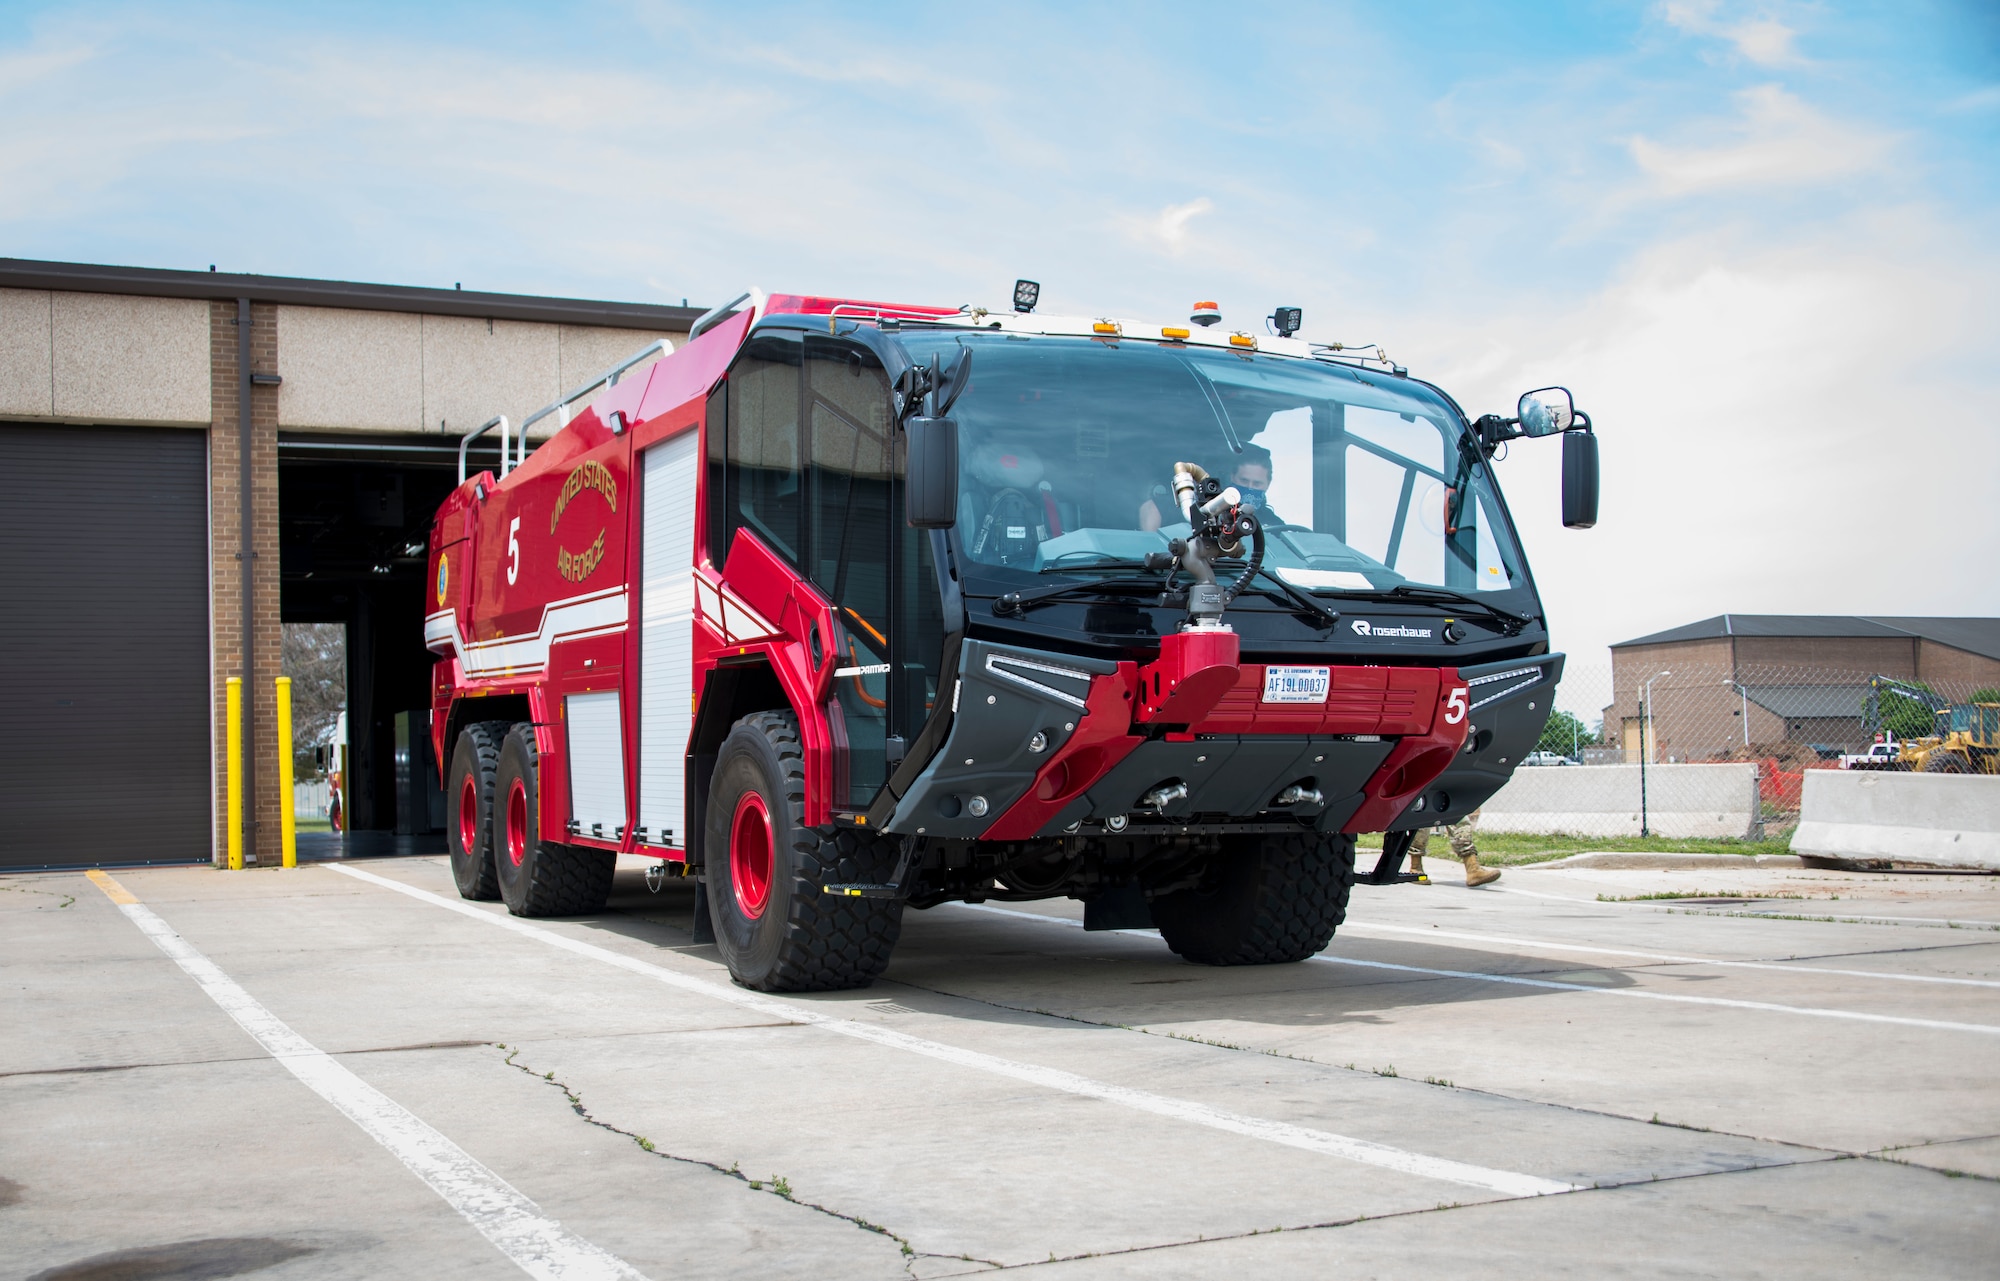 A new fire truck sits outside the base fire station, April 26, 2021, at Altus Air Force Base, Oklahoma. The new fire truck can reach speeds up to 85 miles per hour. (U.S. Air Force photo by Airman 1st Class Amanda Lovelace)